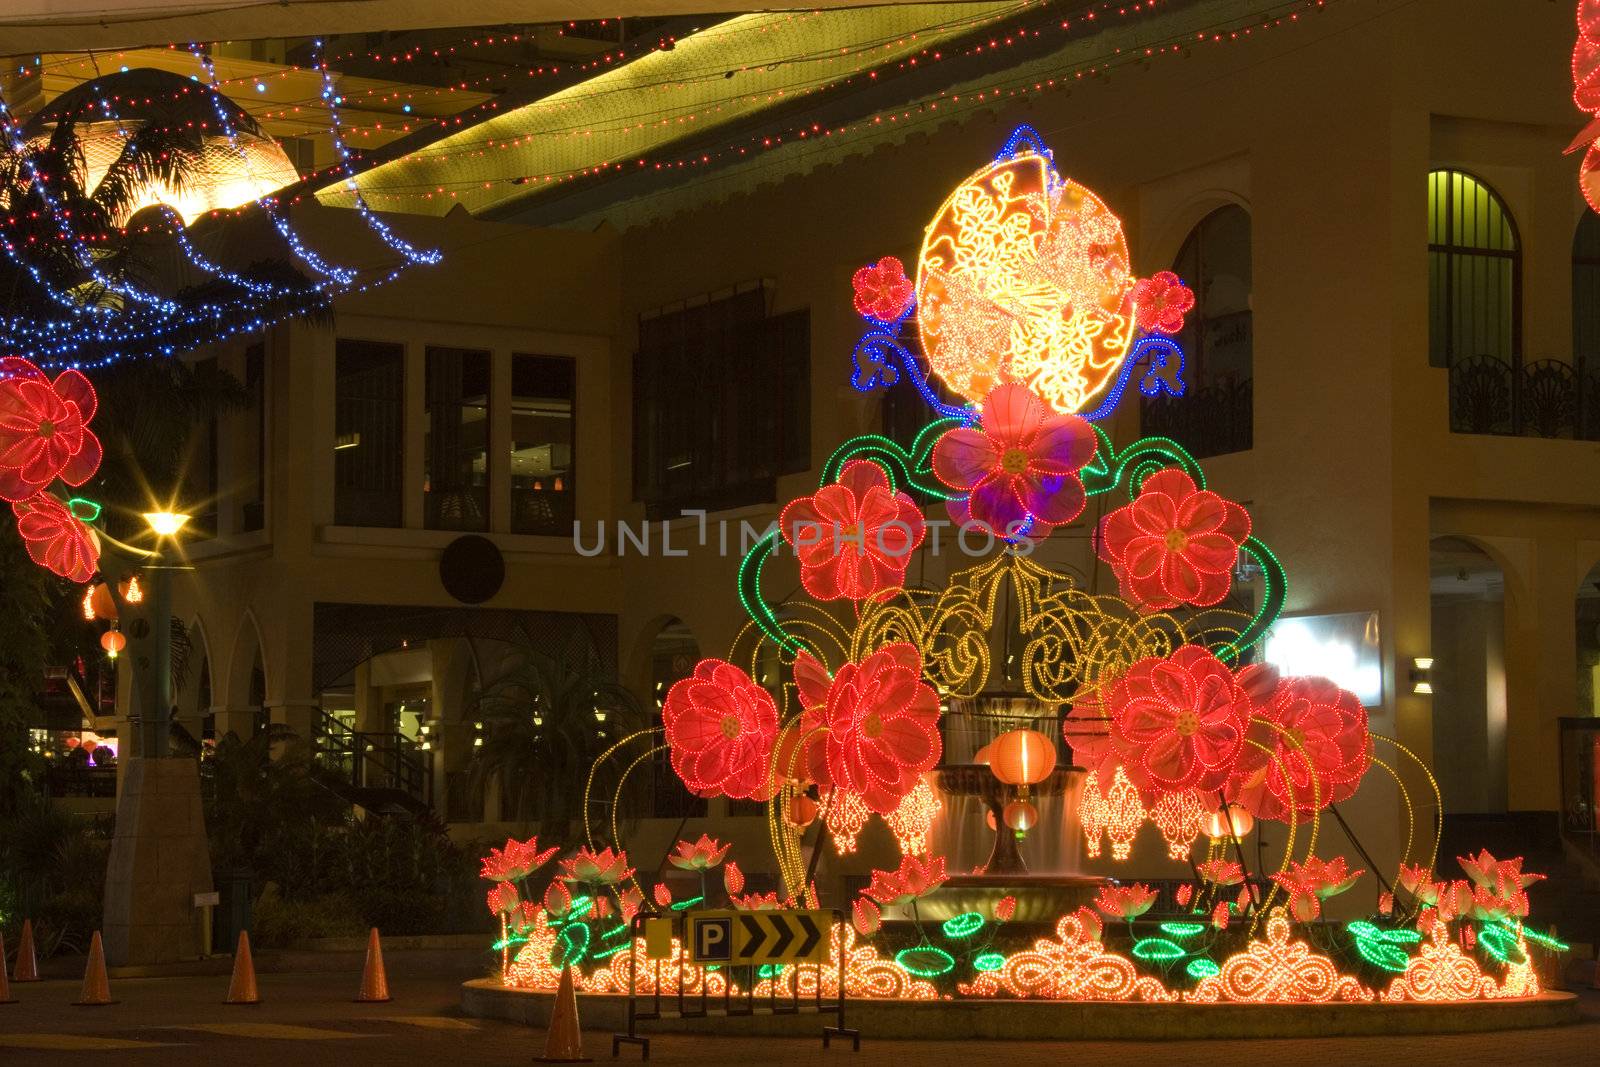 Night image of a street round-about decorated with lanterns and lights during Chinese New Year in Malaysia.